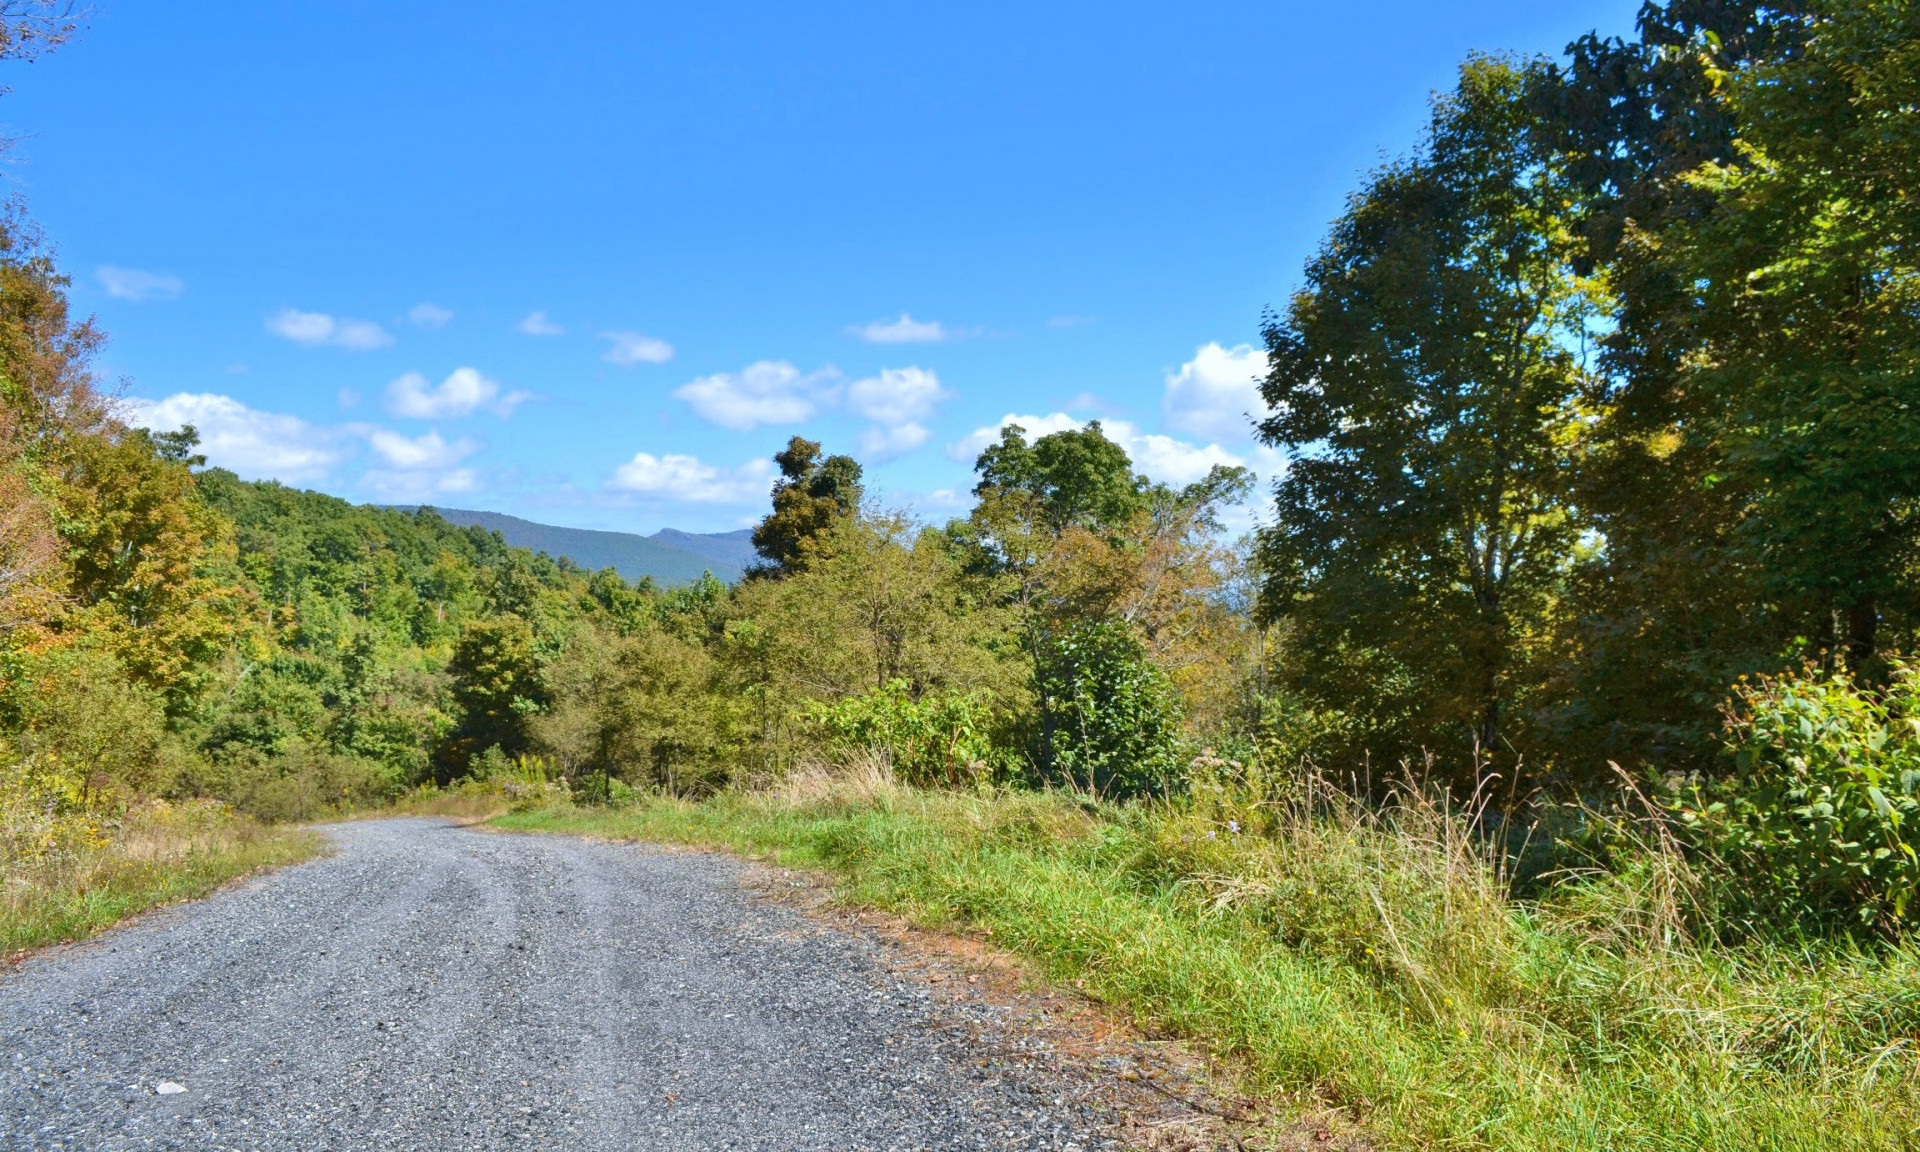 This small mountain community is the ideal place for your Virginia Mountain retreat or primary home.  Bluff Mountain Estates offers affordable home sites at high elevations with access to the Jefferson National Forest.